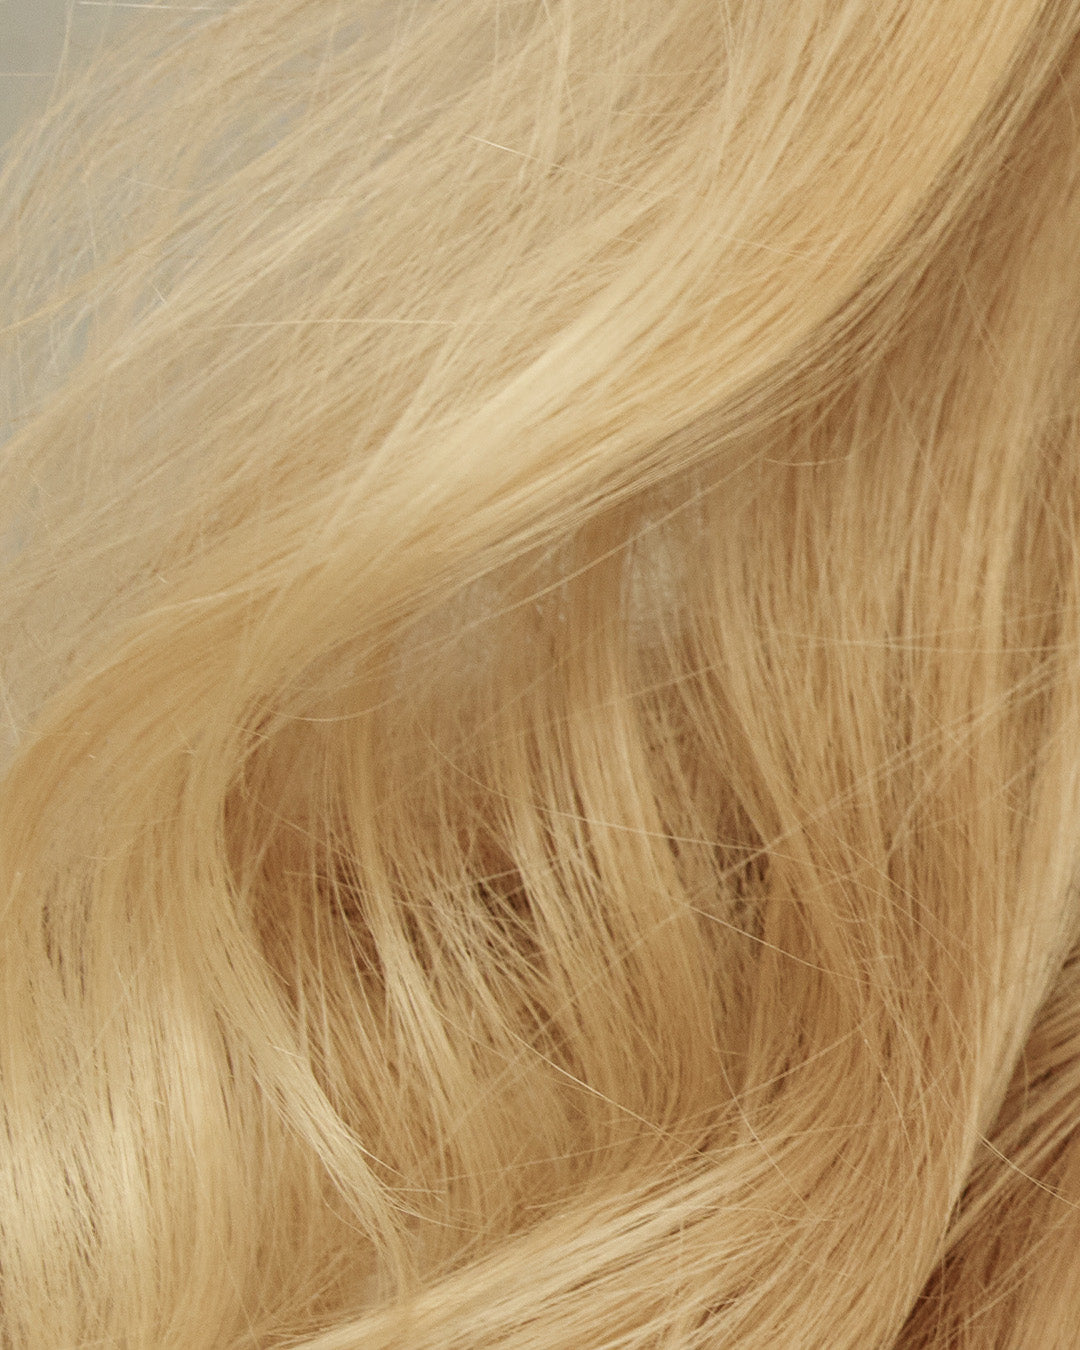 Close up of blonde hair full of volume and bouncy shine